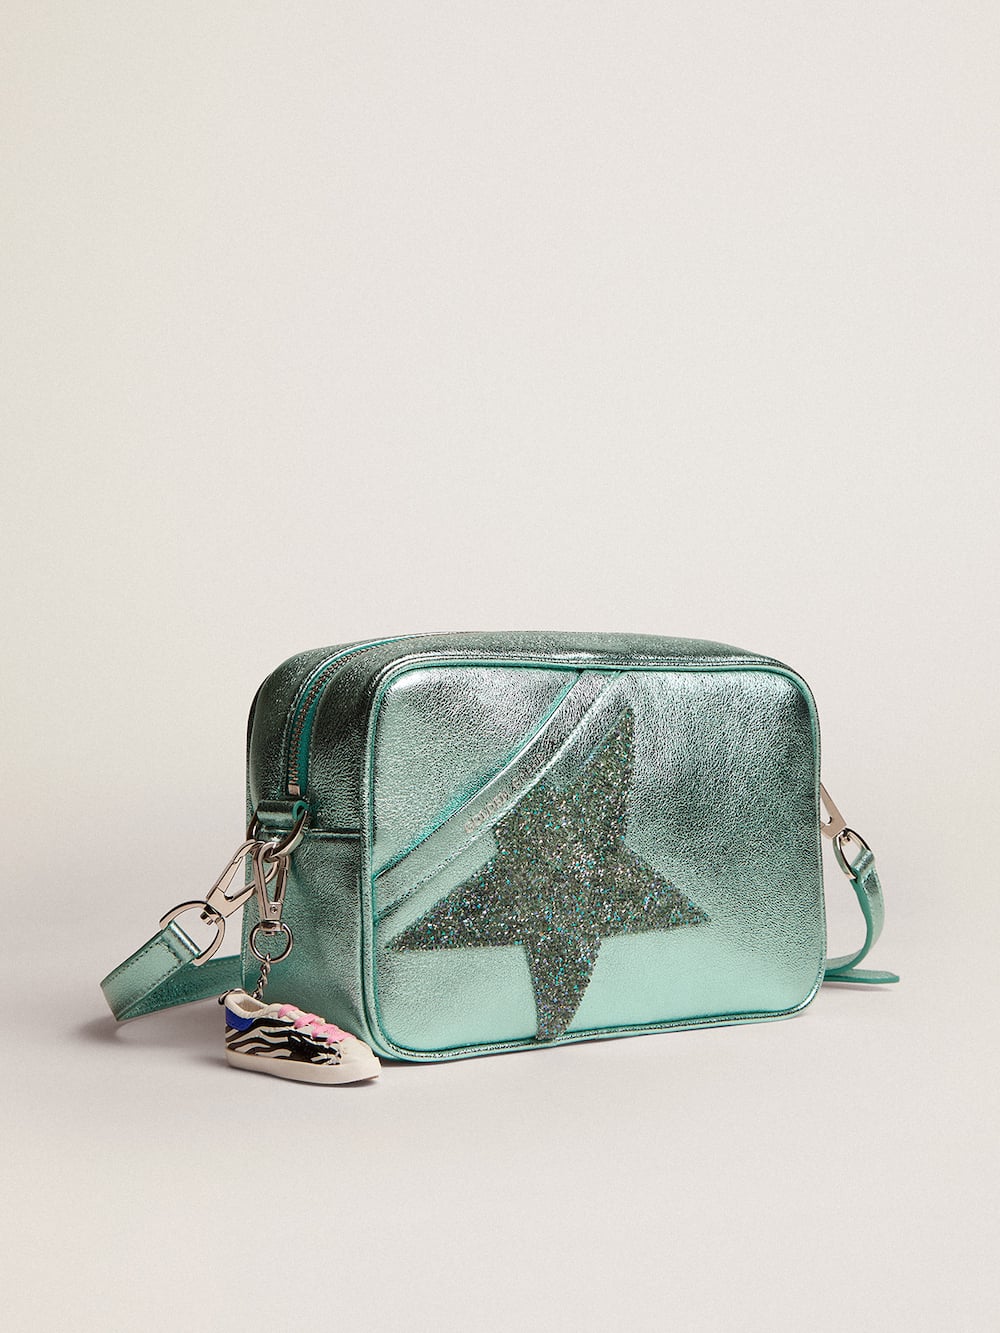 Golden Goose - Women's Star Bag in turquoise leather with star in Swarovski crystals in 